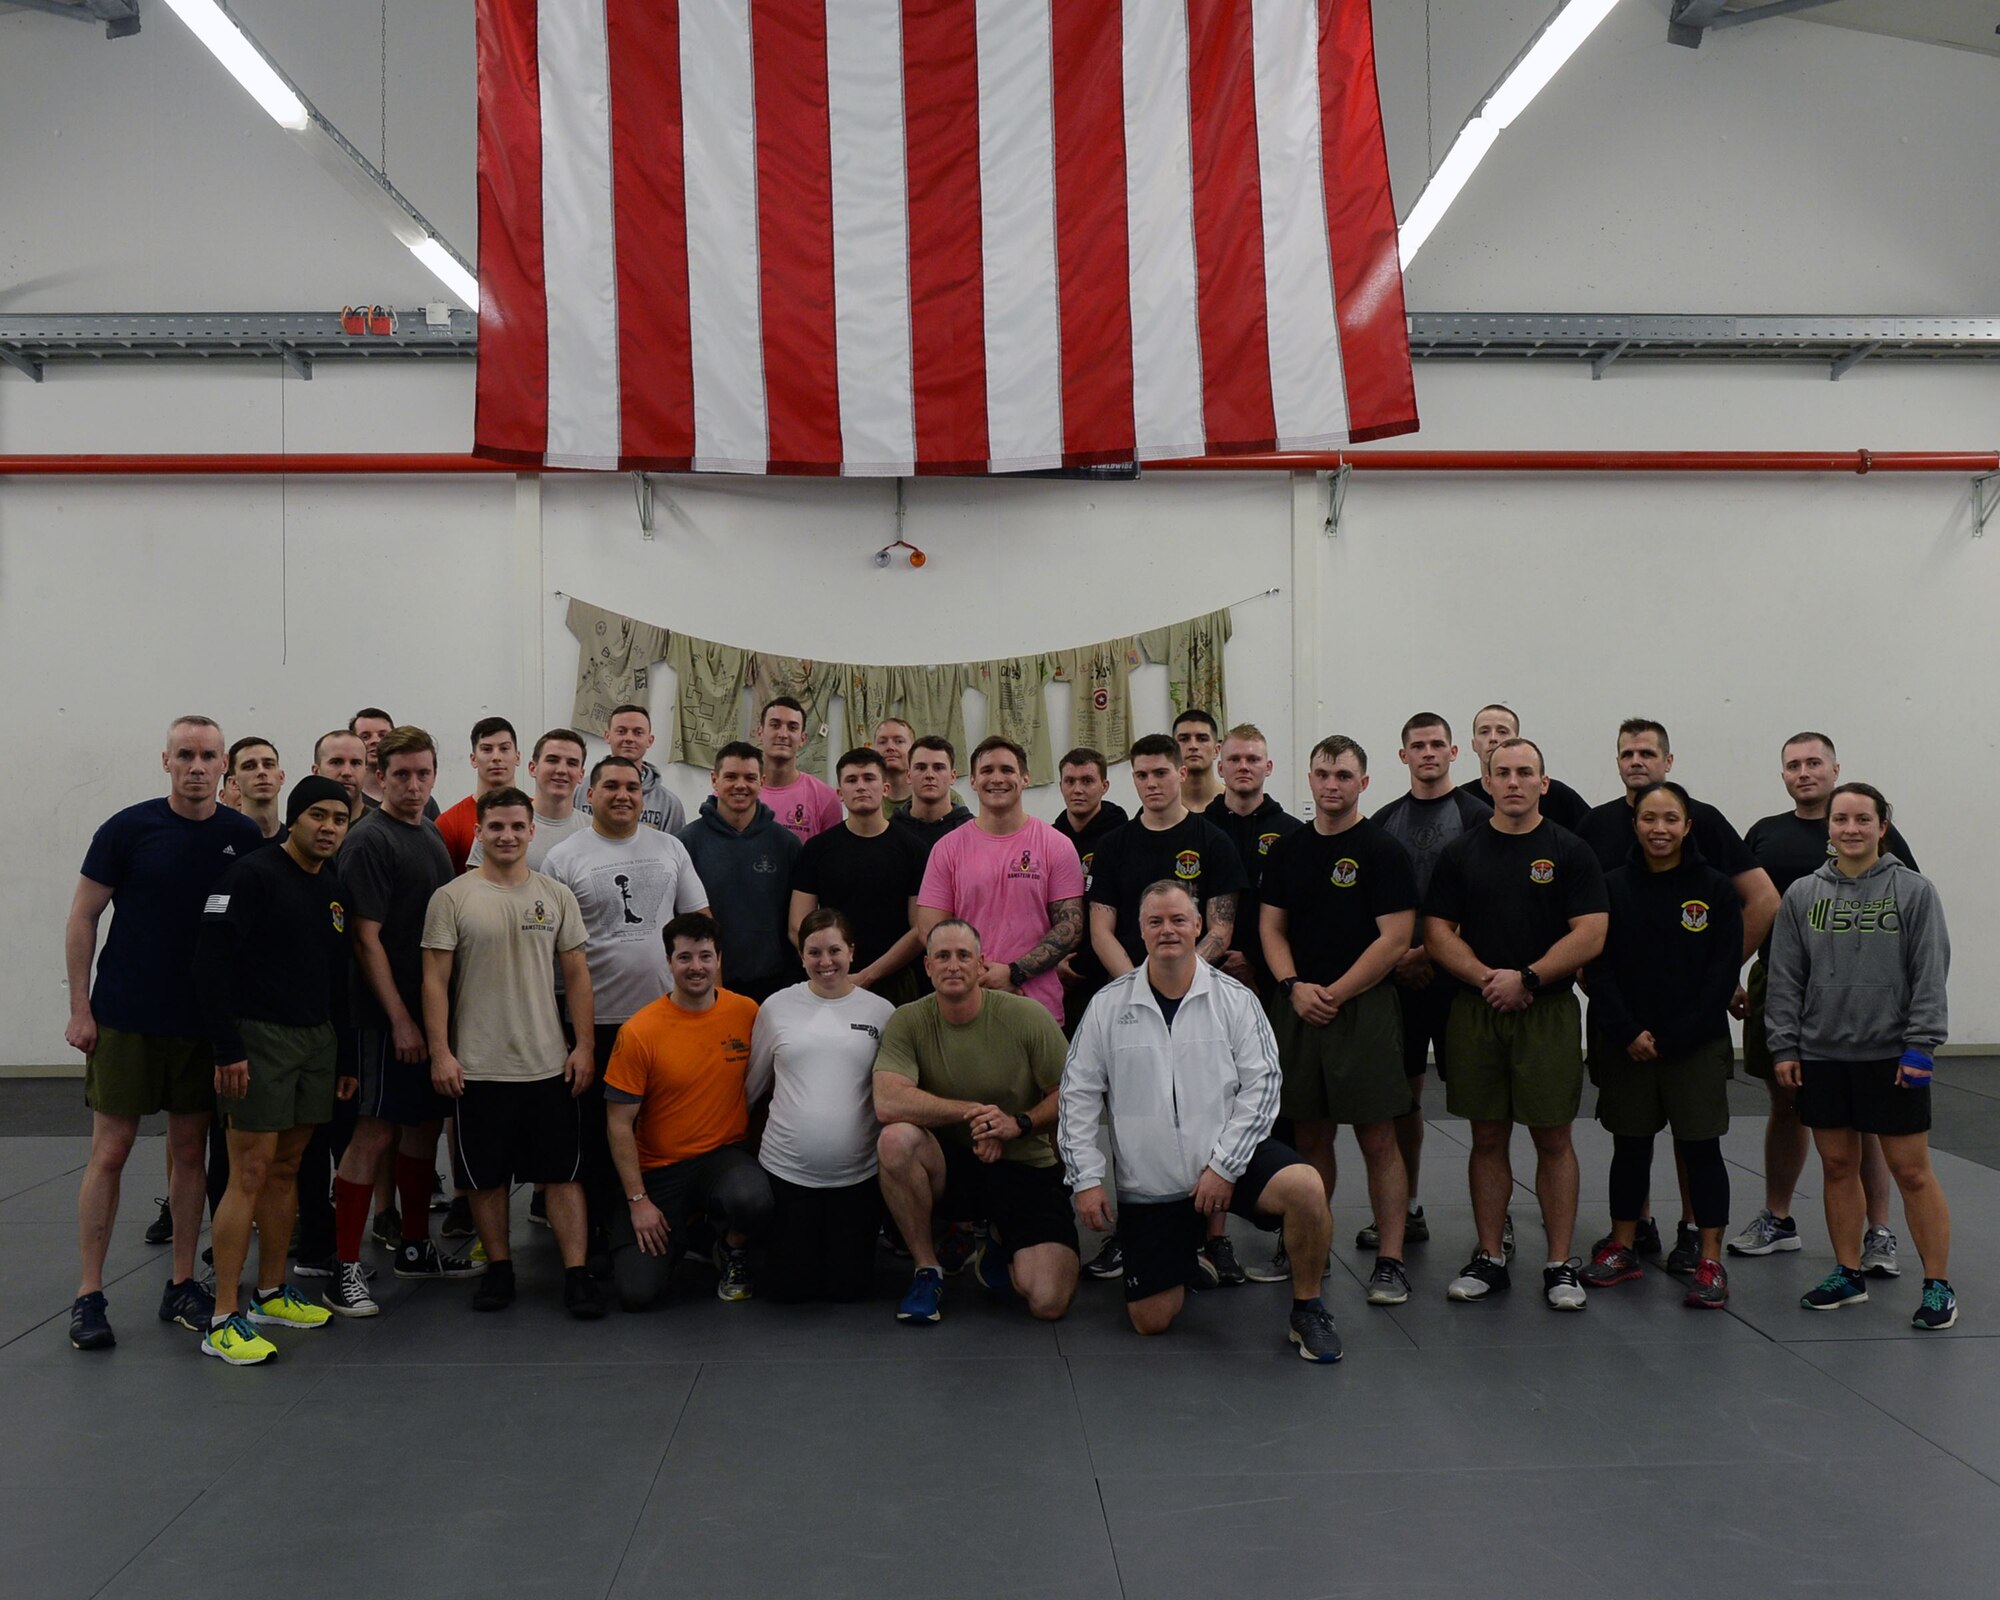 Airmen who participated in an Explosive Ordinance Disposal Fallen Warrior Workout pose for a photo on Ramstein Air Base, Germany, Jan. 5, 2018. Thirty-six Airmen from multiple units completed the workout to honor and remember fallen EOD Airmen; Tech. Sgt. Matthew Schwartz, Senior Airman Bryan Bell, and Airman 1st Class Matthew Seidler - call sign "Tripwire". (U.S. Air Force photo by Senior Airman Jimmie D. Pike)